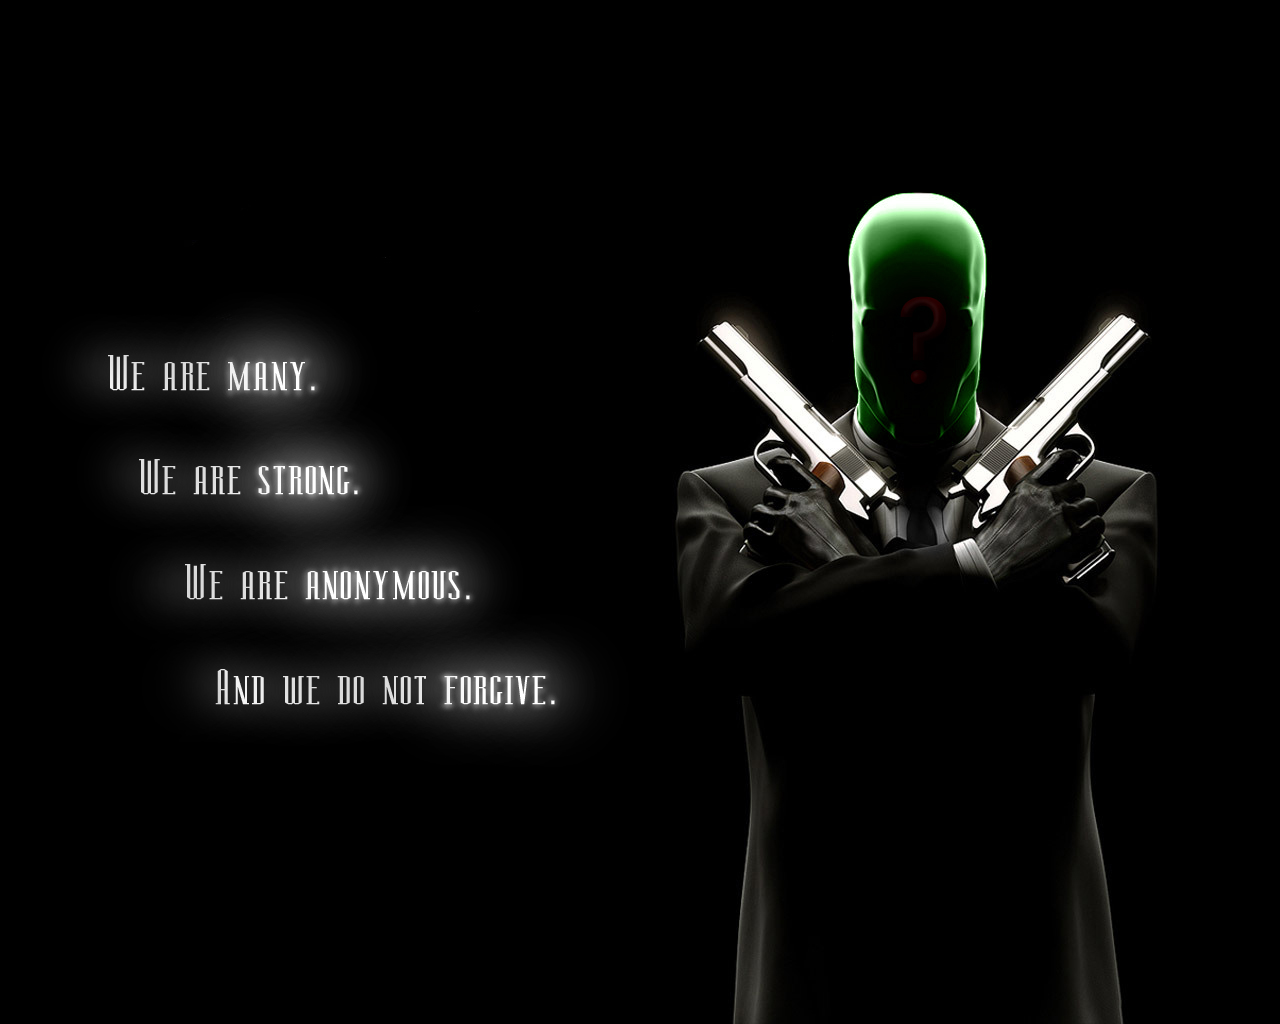 Hacker Quotes Wallpaper Free Hacker Quotes Background